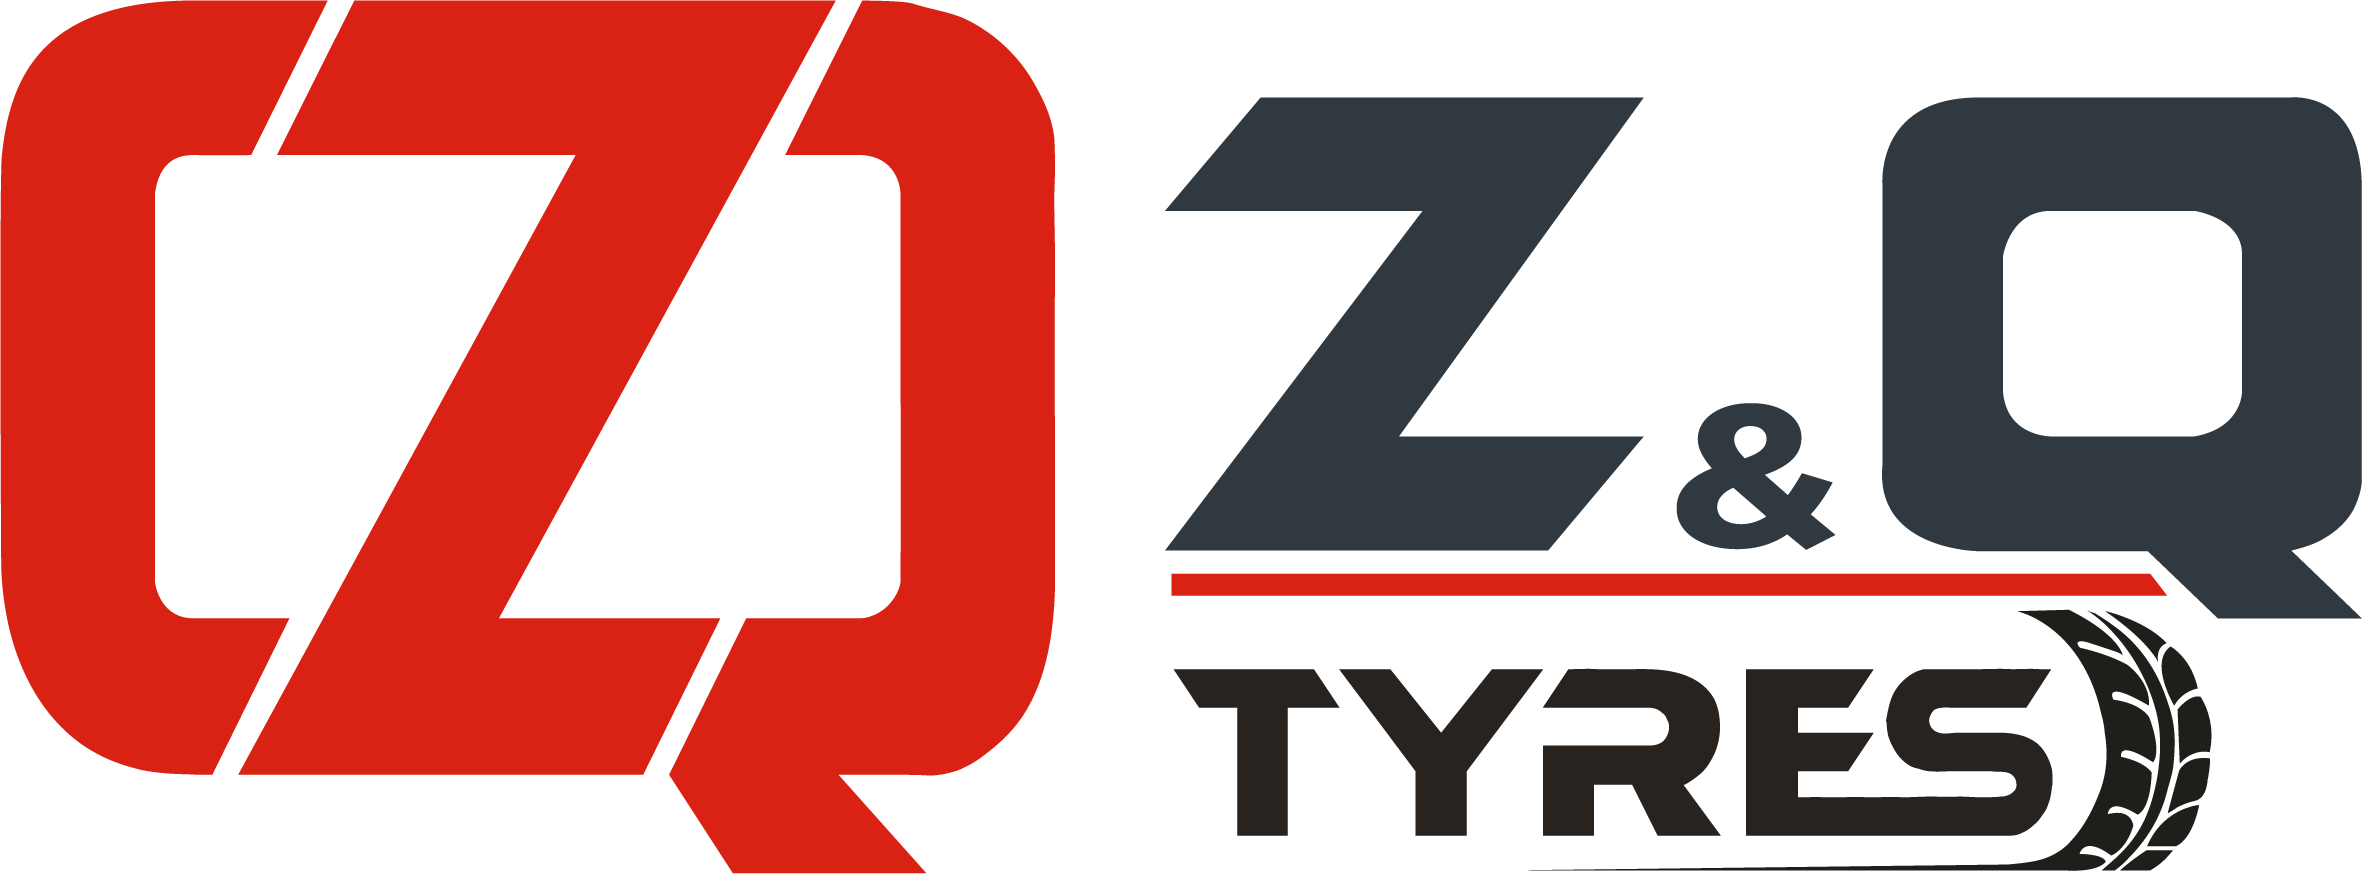 ZQ TYRES - Agricultural Tires, Industrial Tires and Construction Machinery Tires | Tire Reconditioning, Hot and Cold Retreading and Accessories